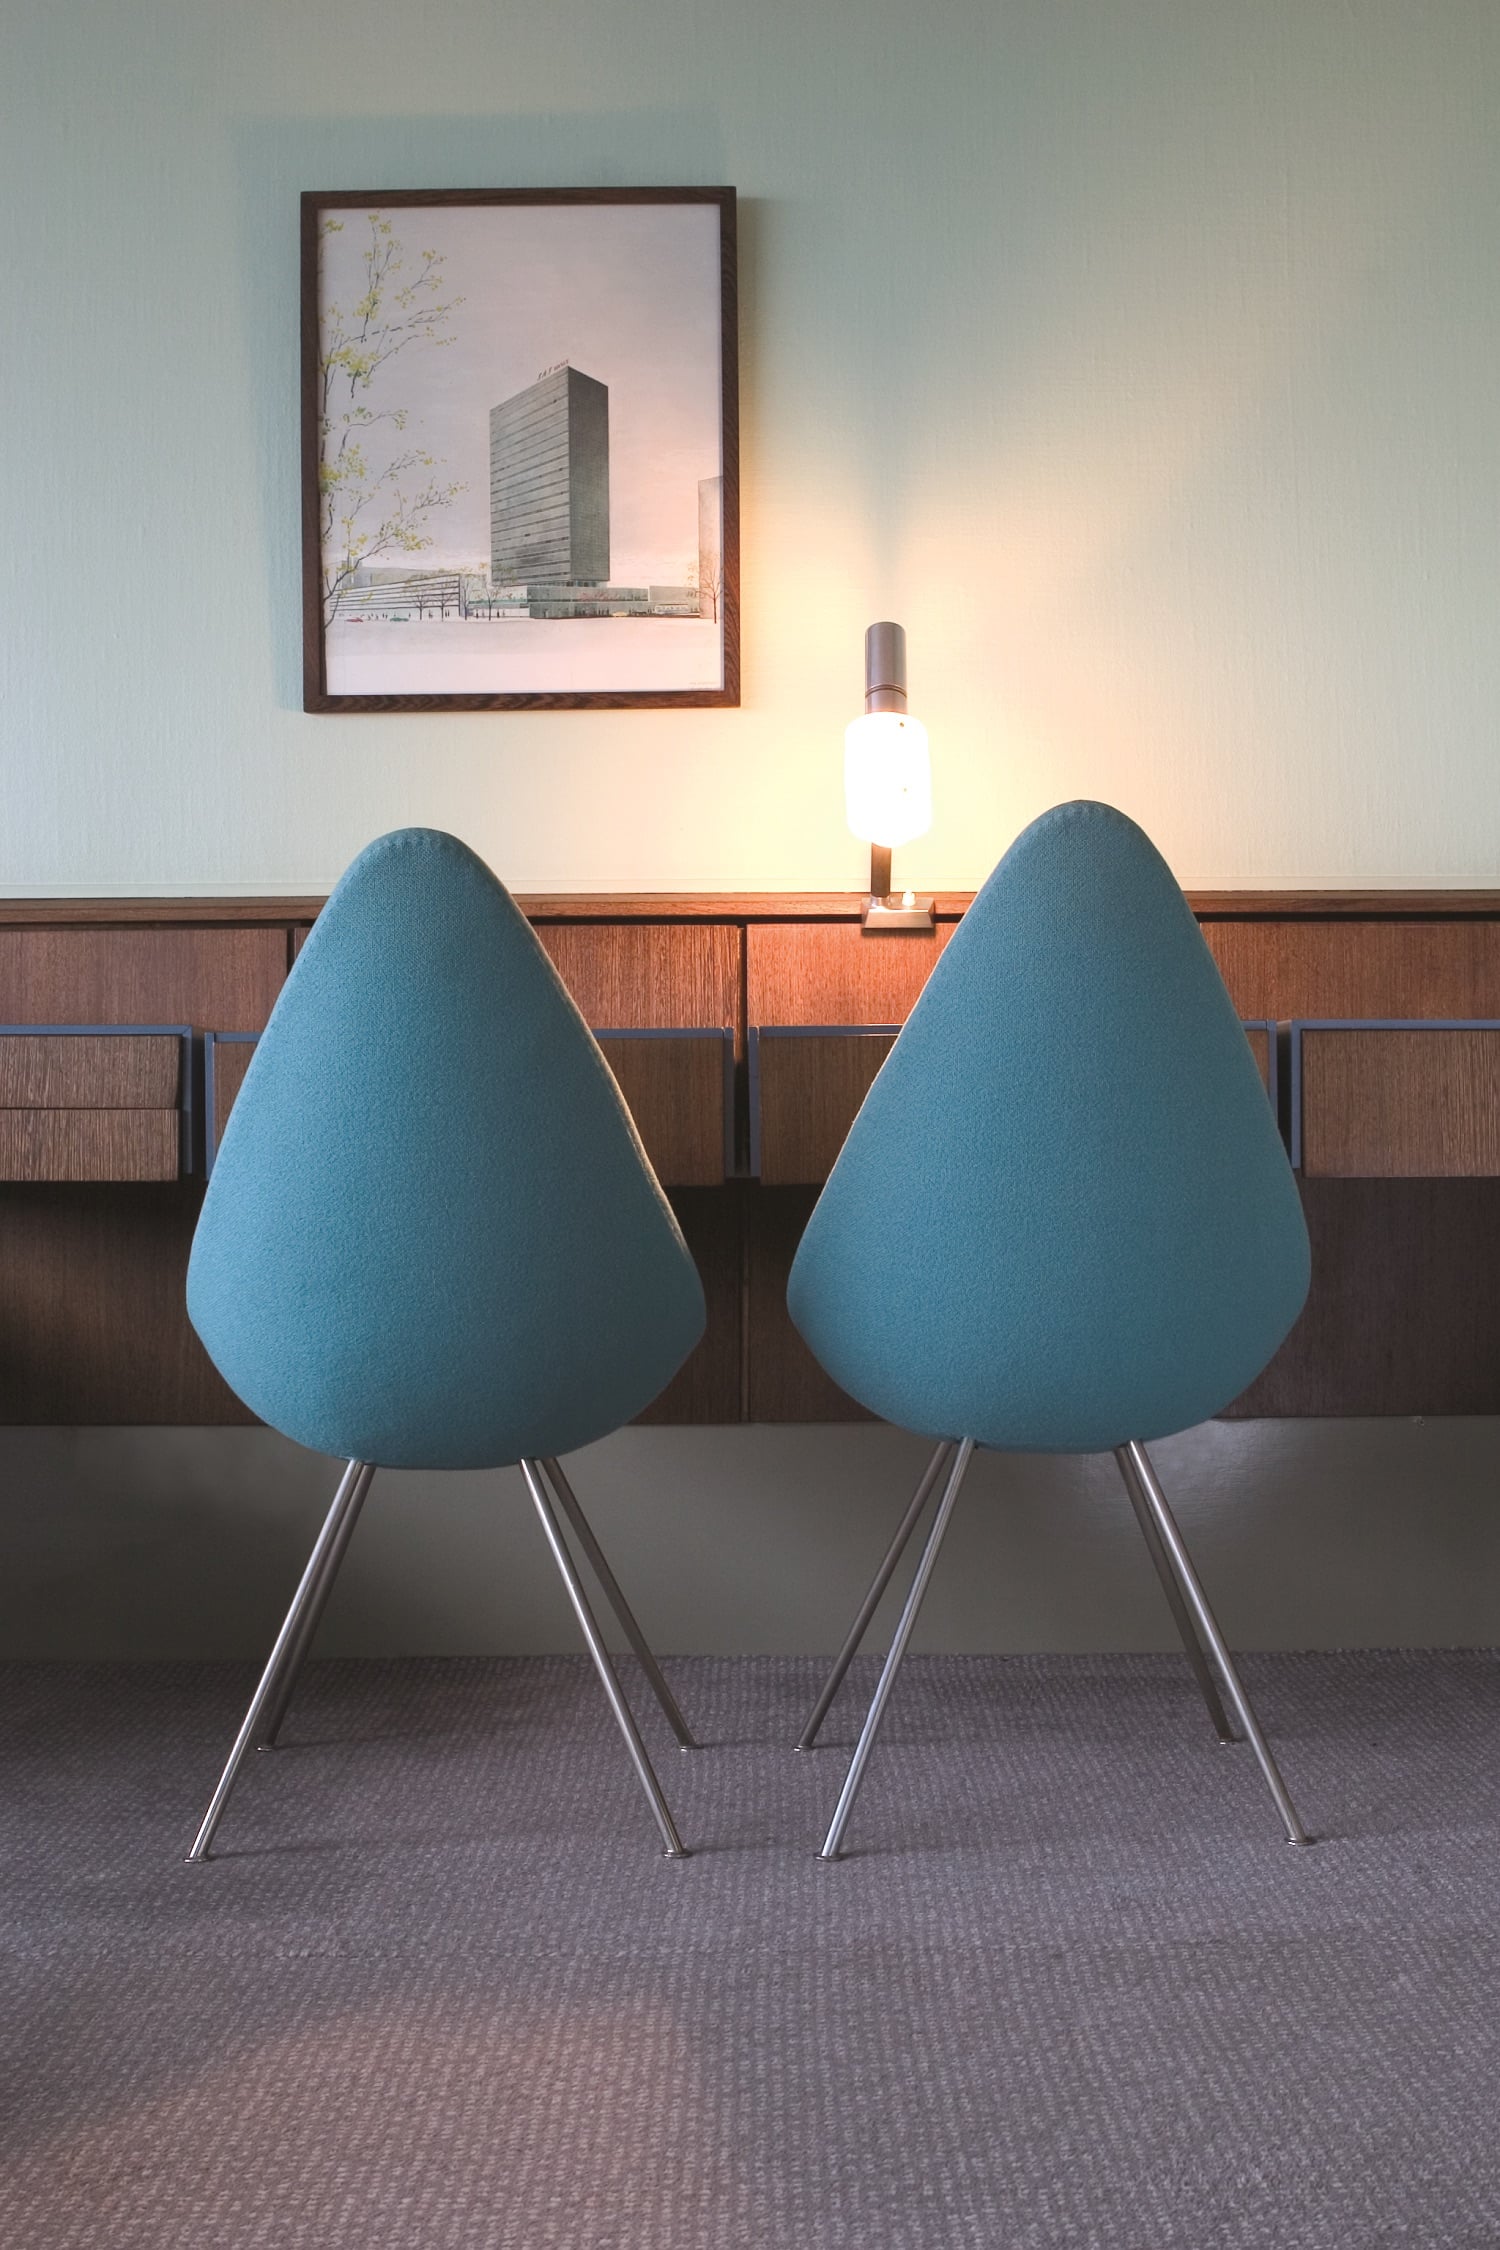 In room 606 of the Radisson Blu Royal Hotel, two Drop chairs by Arne Jacobsen offer an up-close view of a vintage photo of the building's exterior.